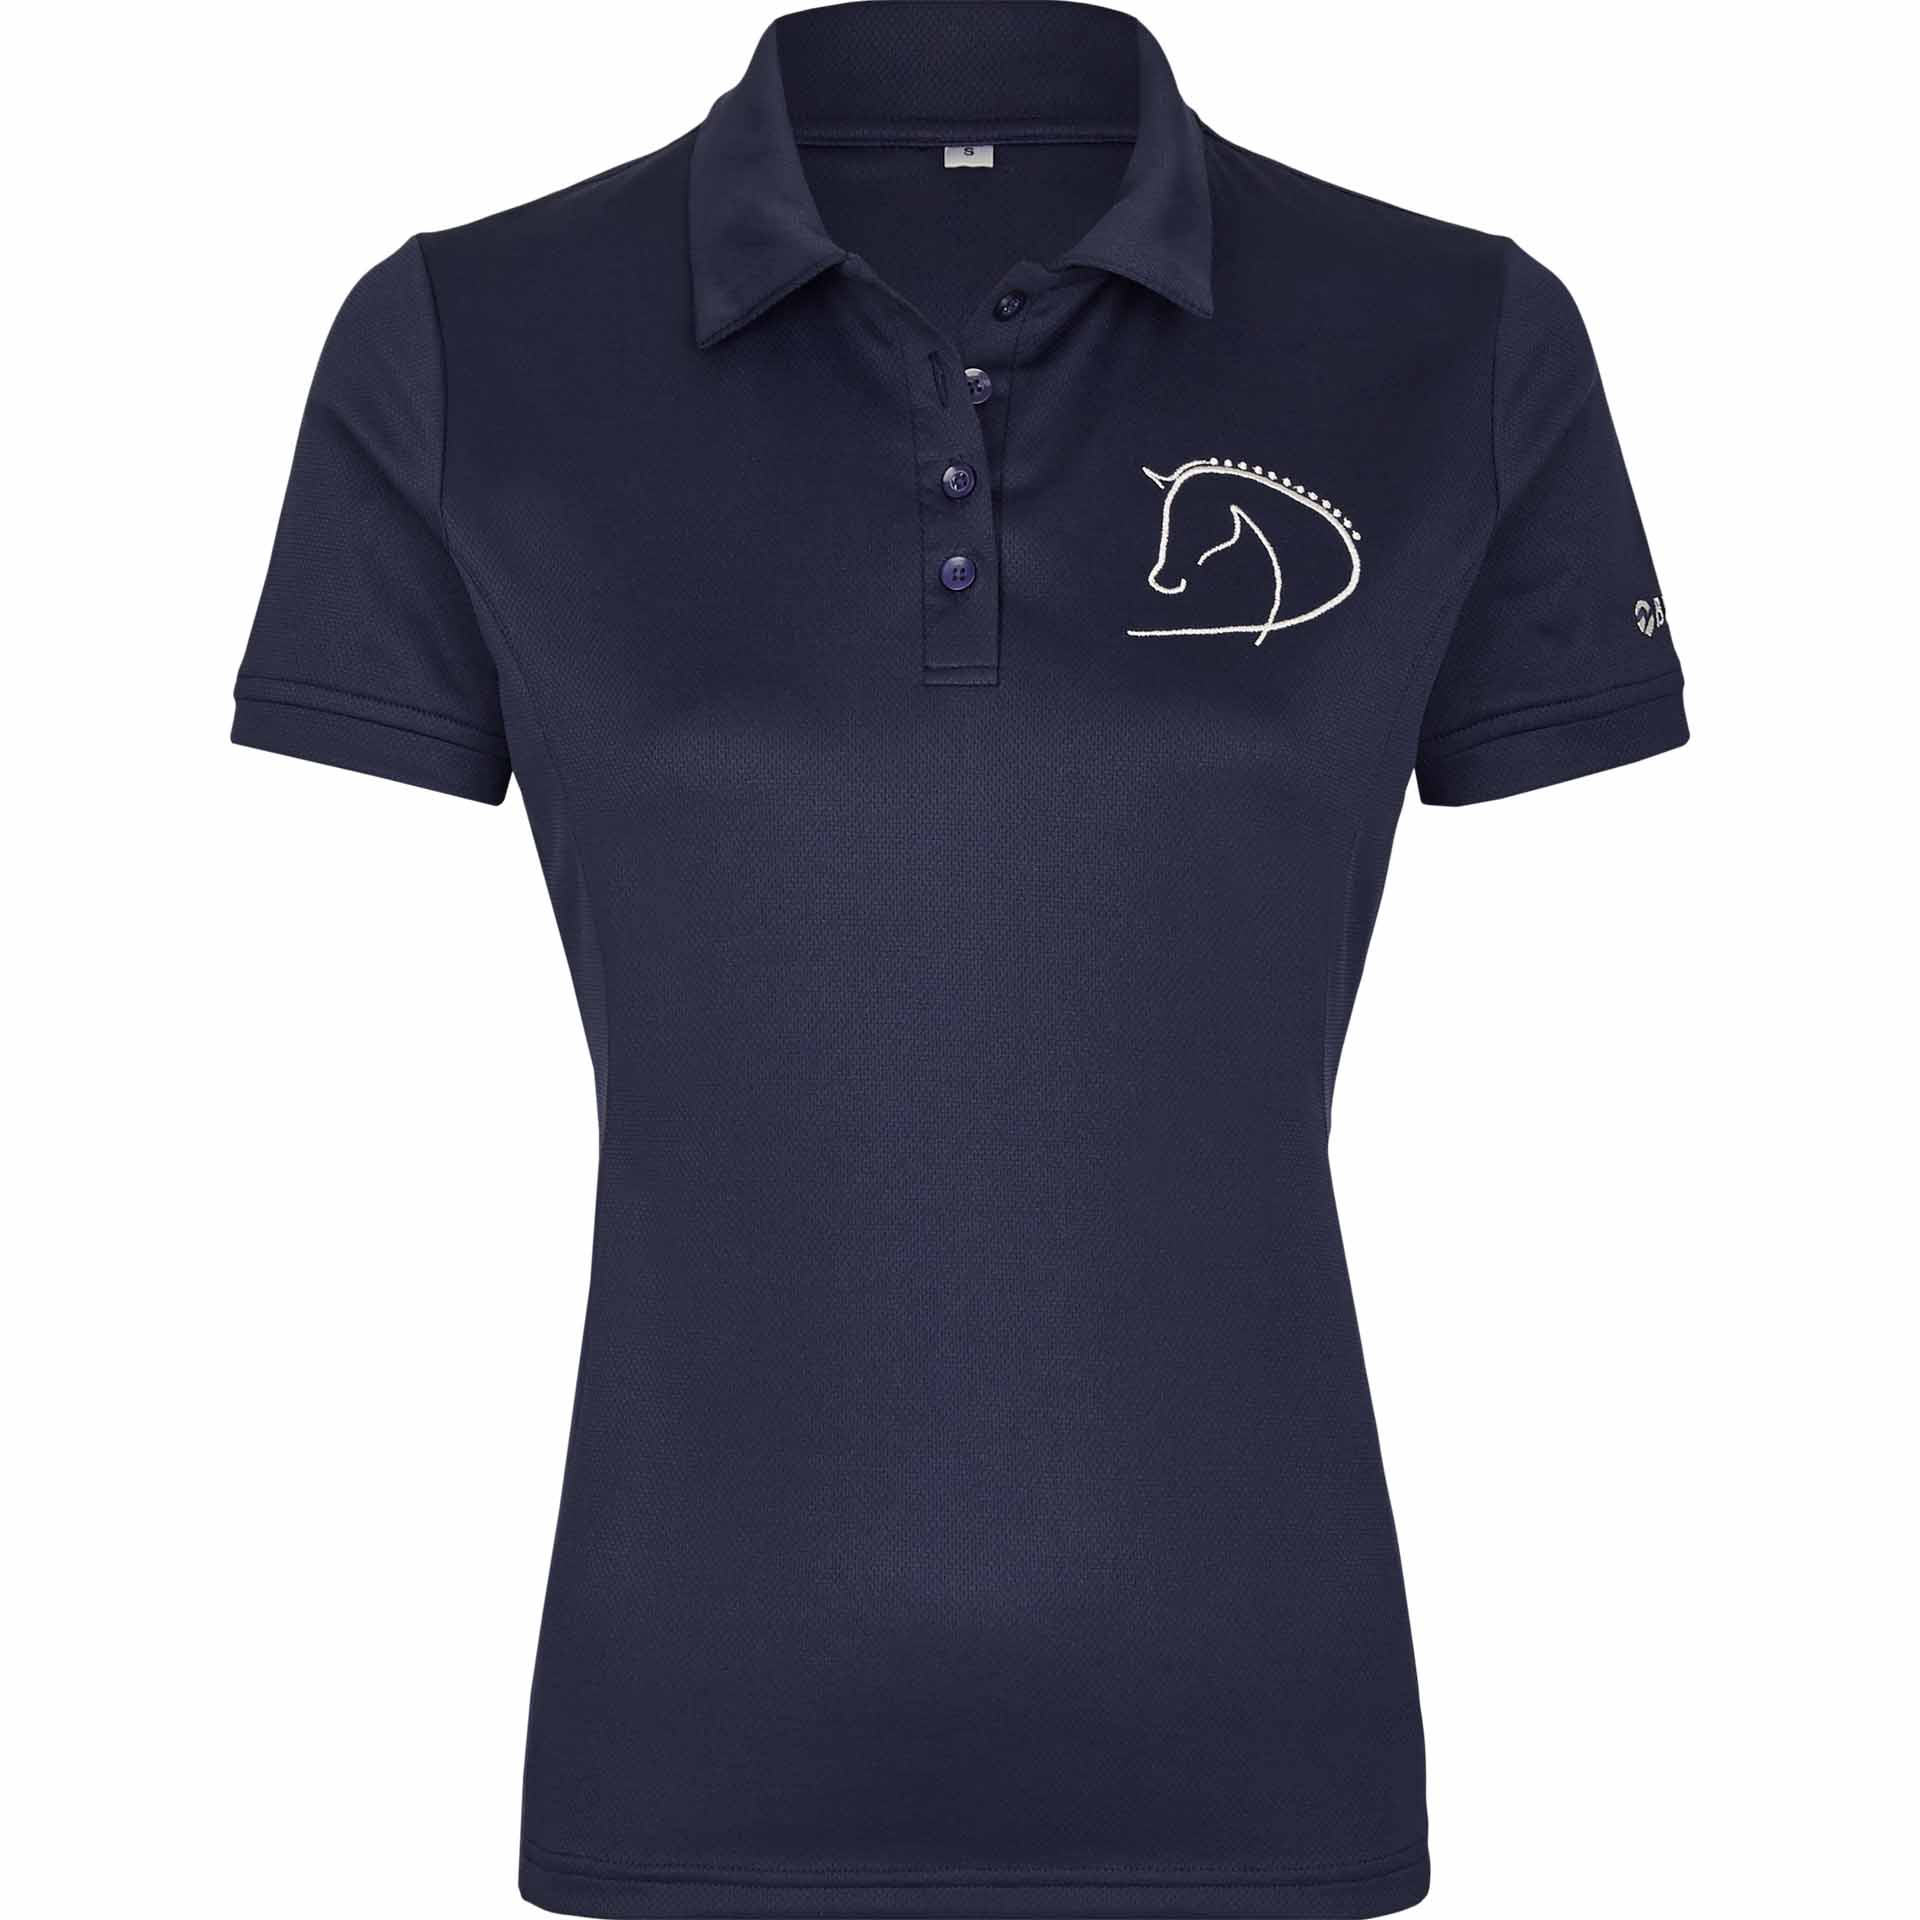 BUSSE Polo-Shirt CREW S navy